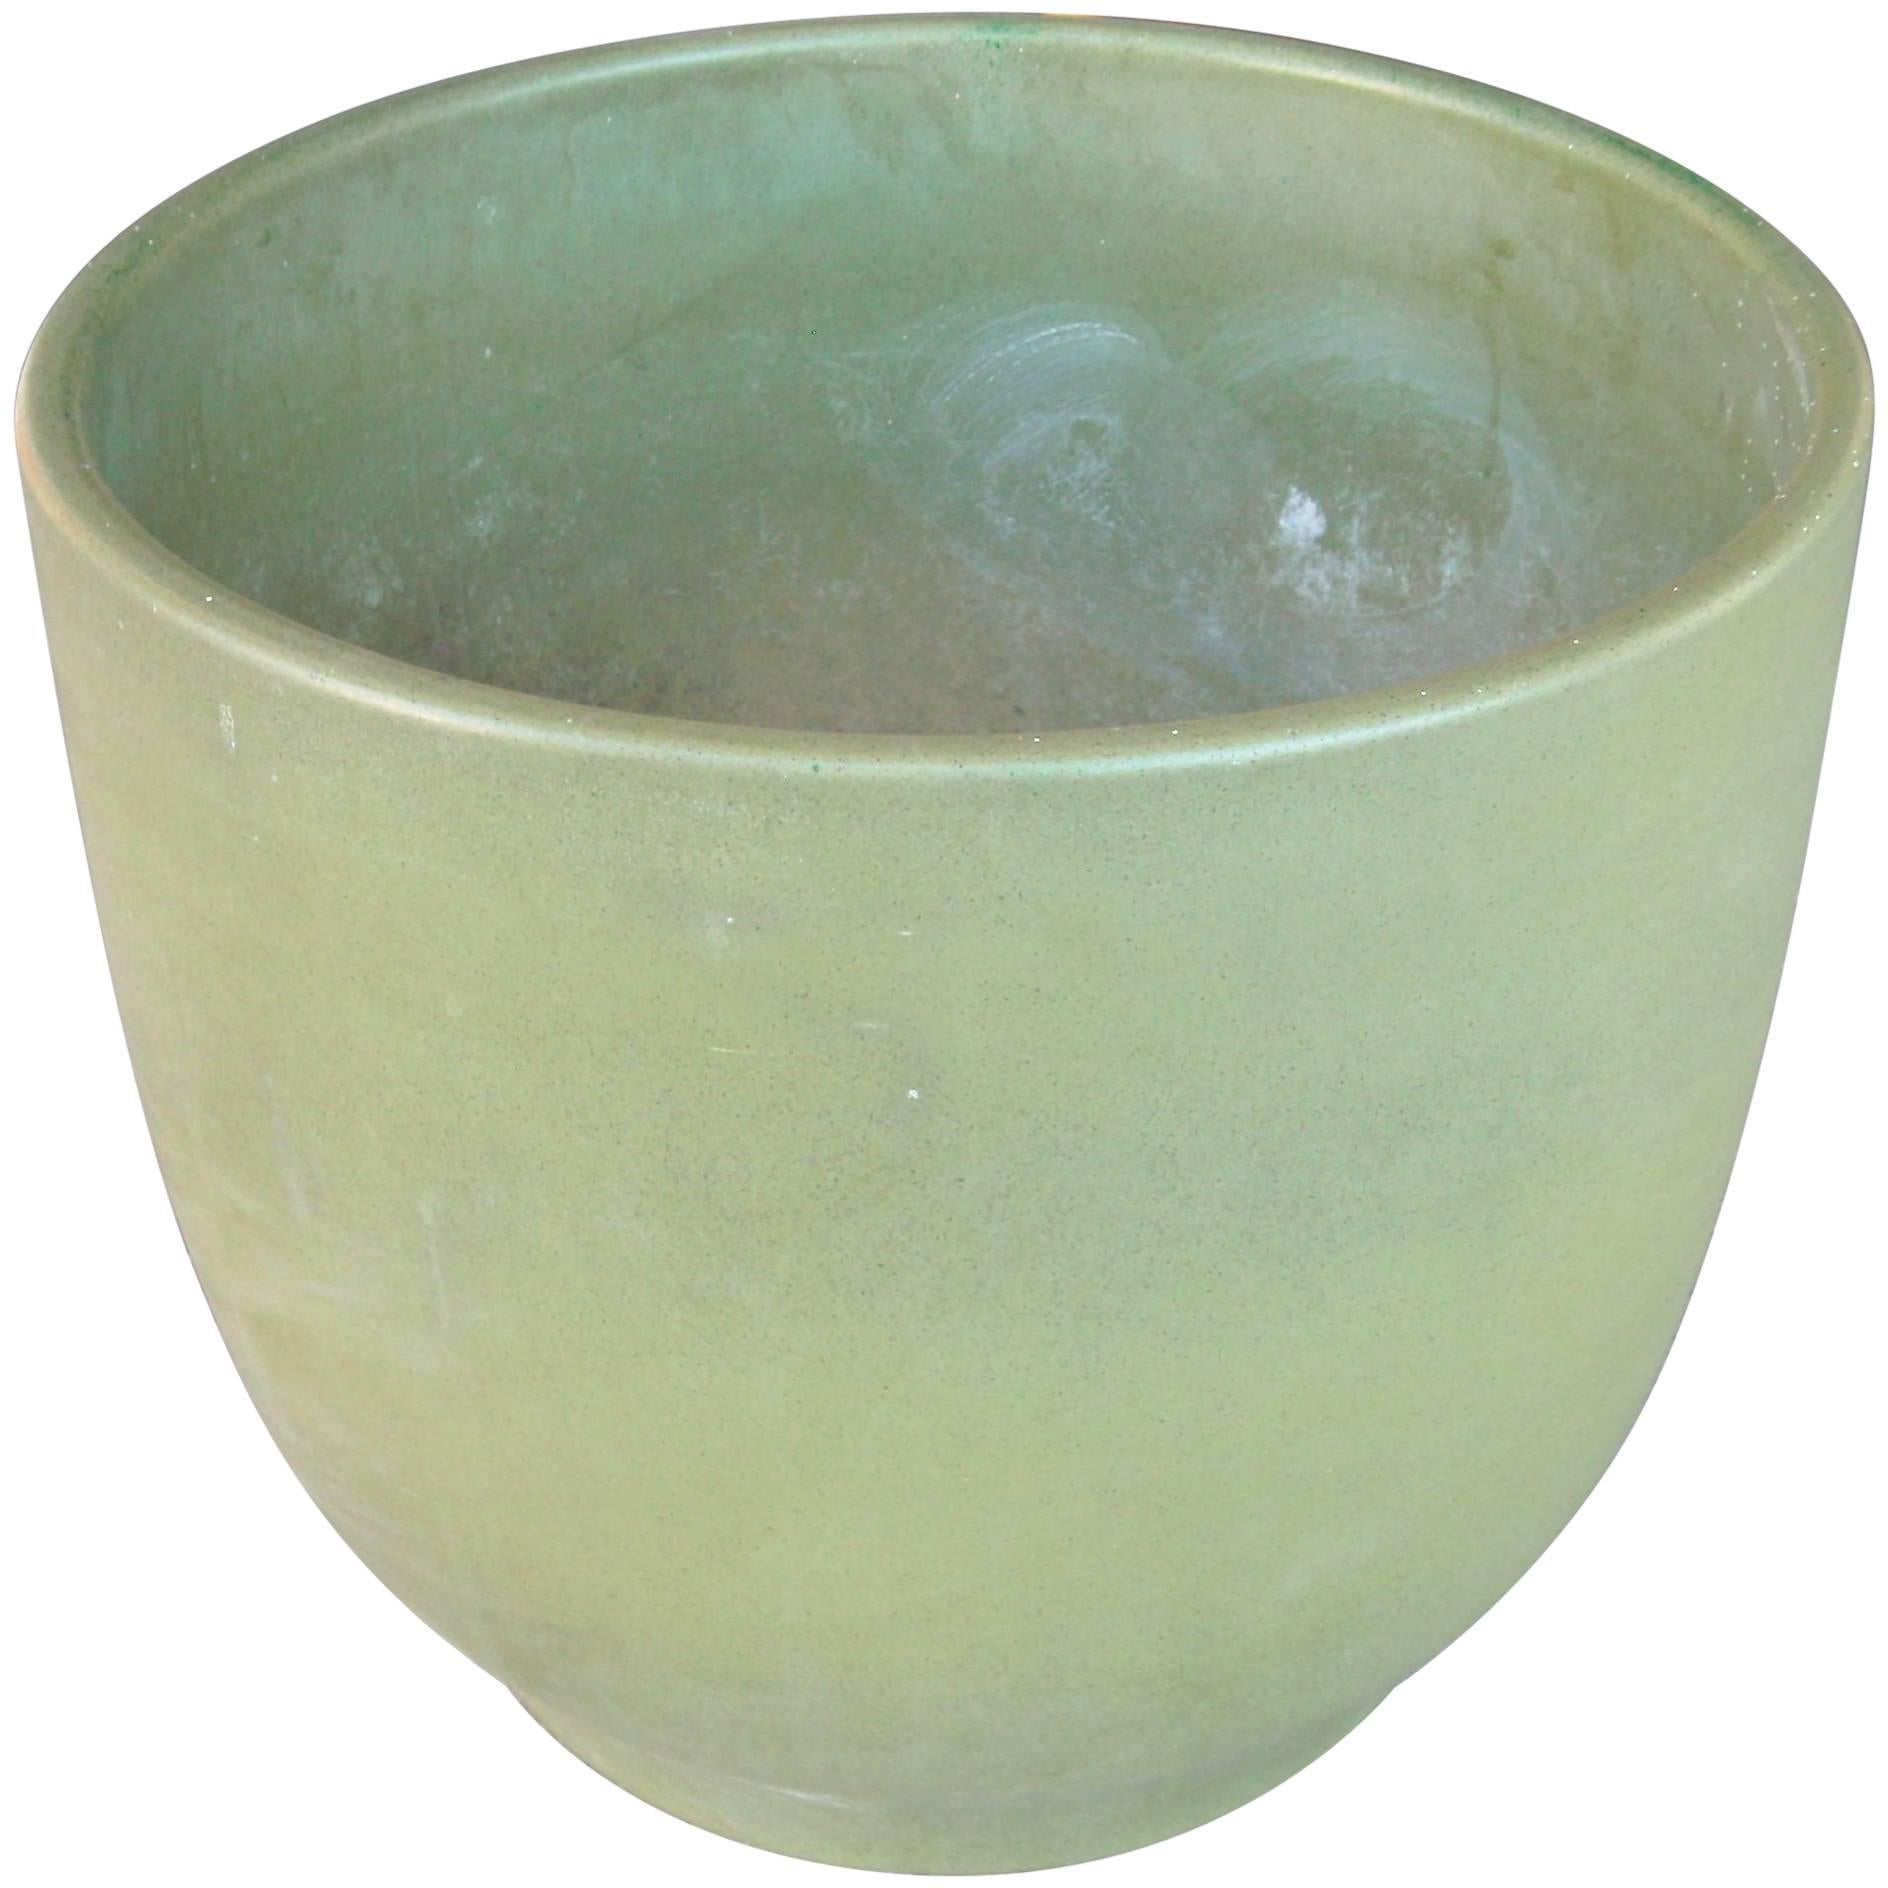 Gainey Large Planter, Ceramic/Pottery, Marked, Olive Green